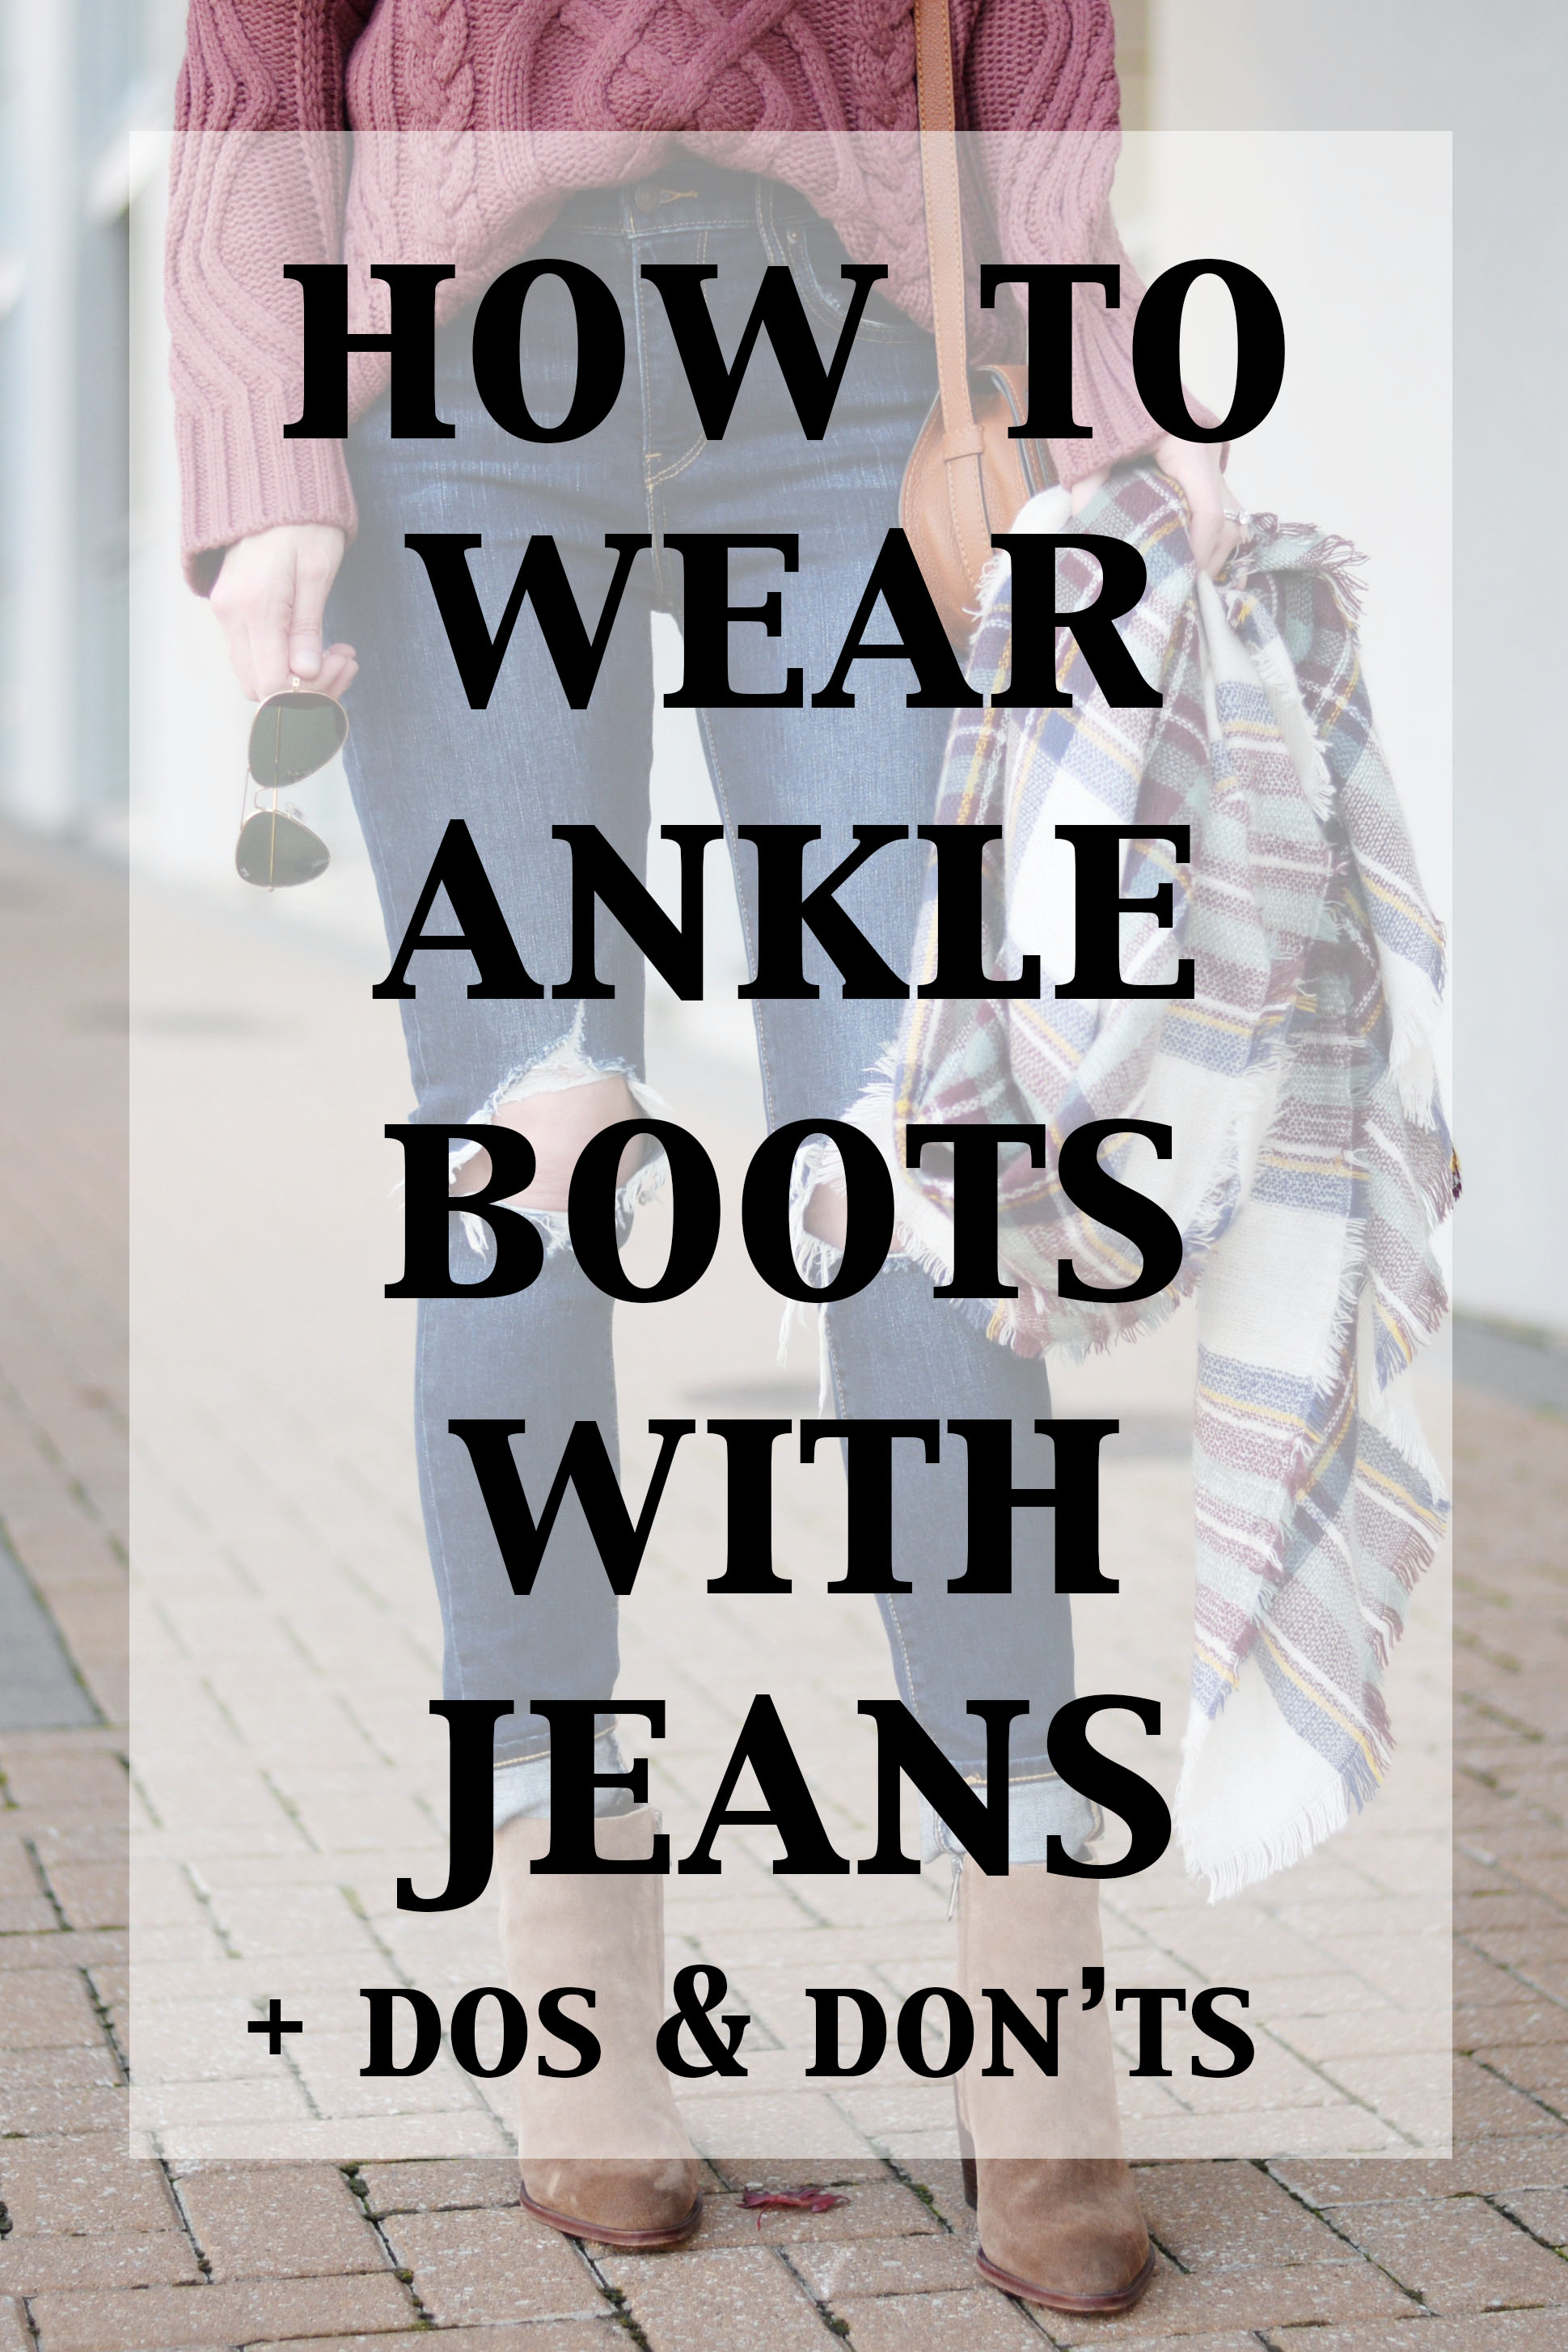 How To Style Flat Boots: Improved Street Style Ideas 2019  Boots outfit  ankle, Black boots outfit, Black flat ankle boots